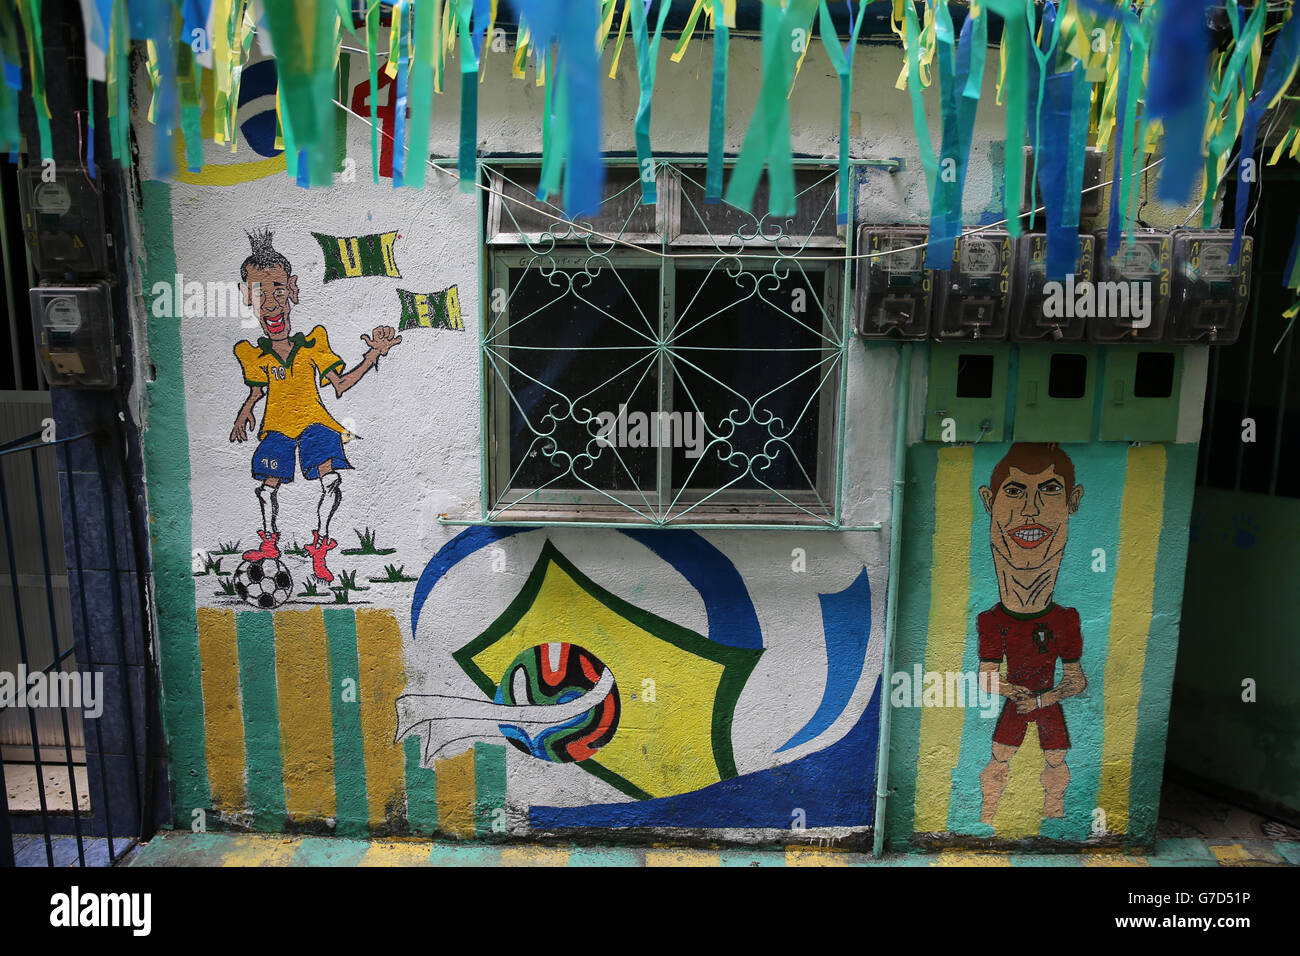 Rio De Janeiro, Brazil views of daily life in Rocinha Favela on the day of Brazil playing in the third place play off in World Cup 2014 finals with art work of Brazil's Neymar and Portual's Ronaldo Stock Photo